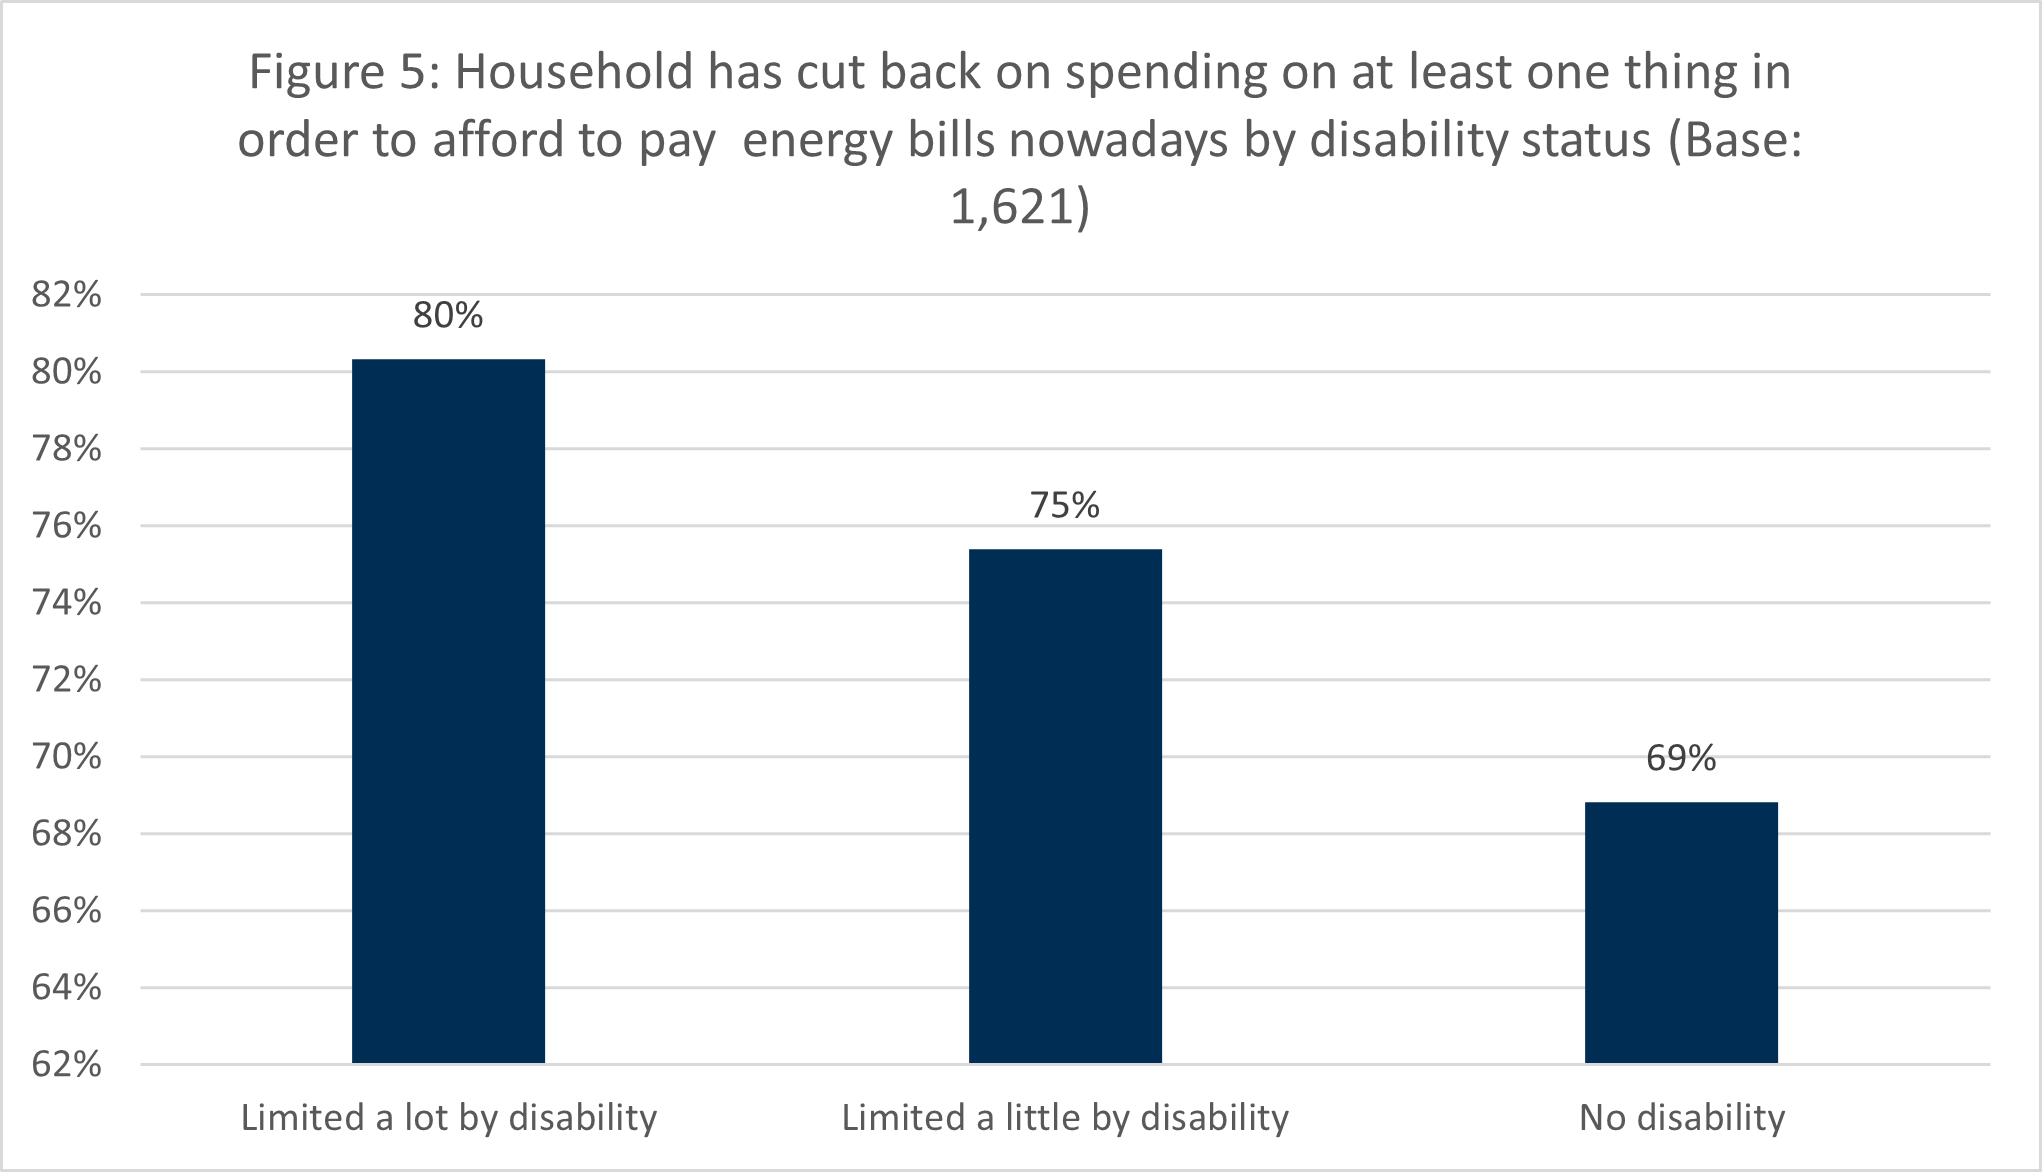 The figures shows more disabled people have cut back on spending to afford their bills